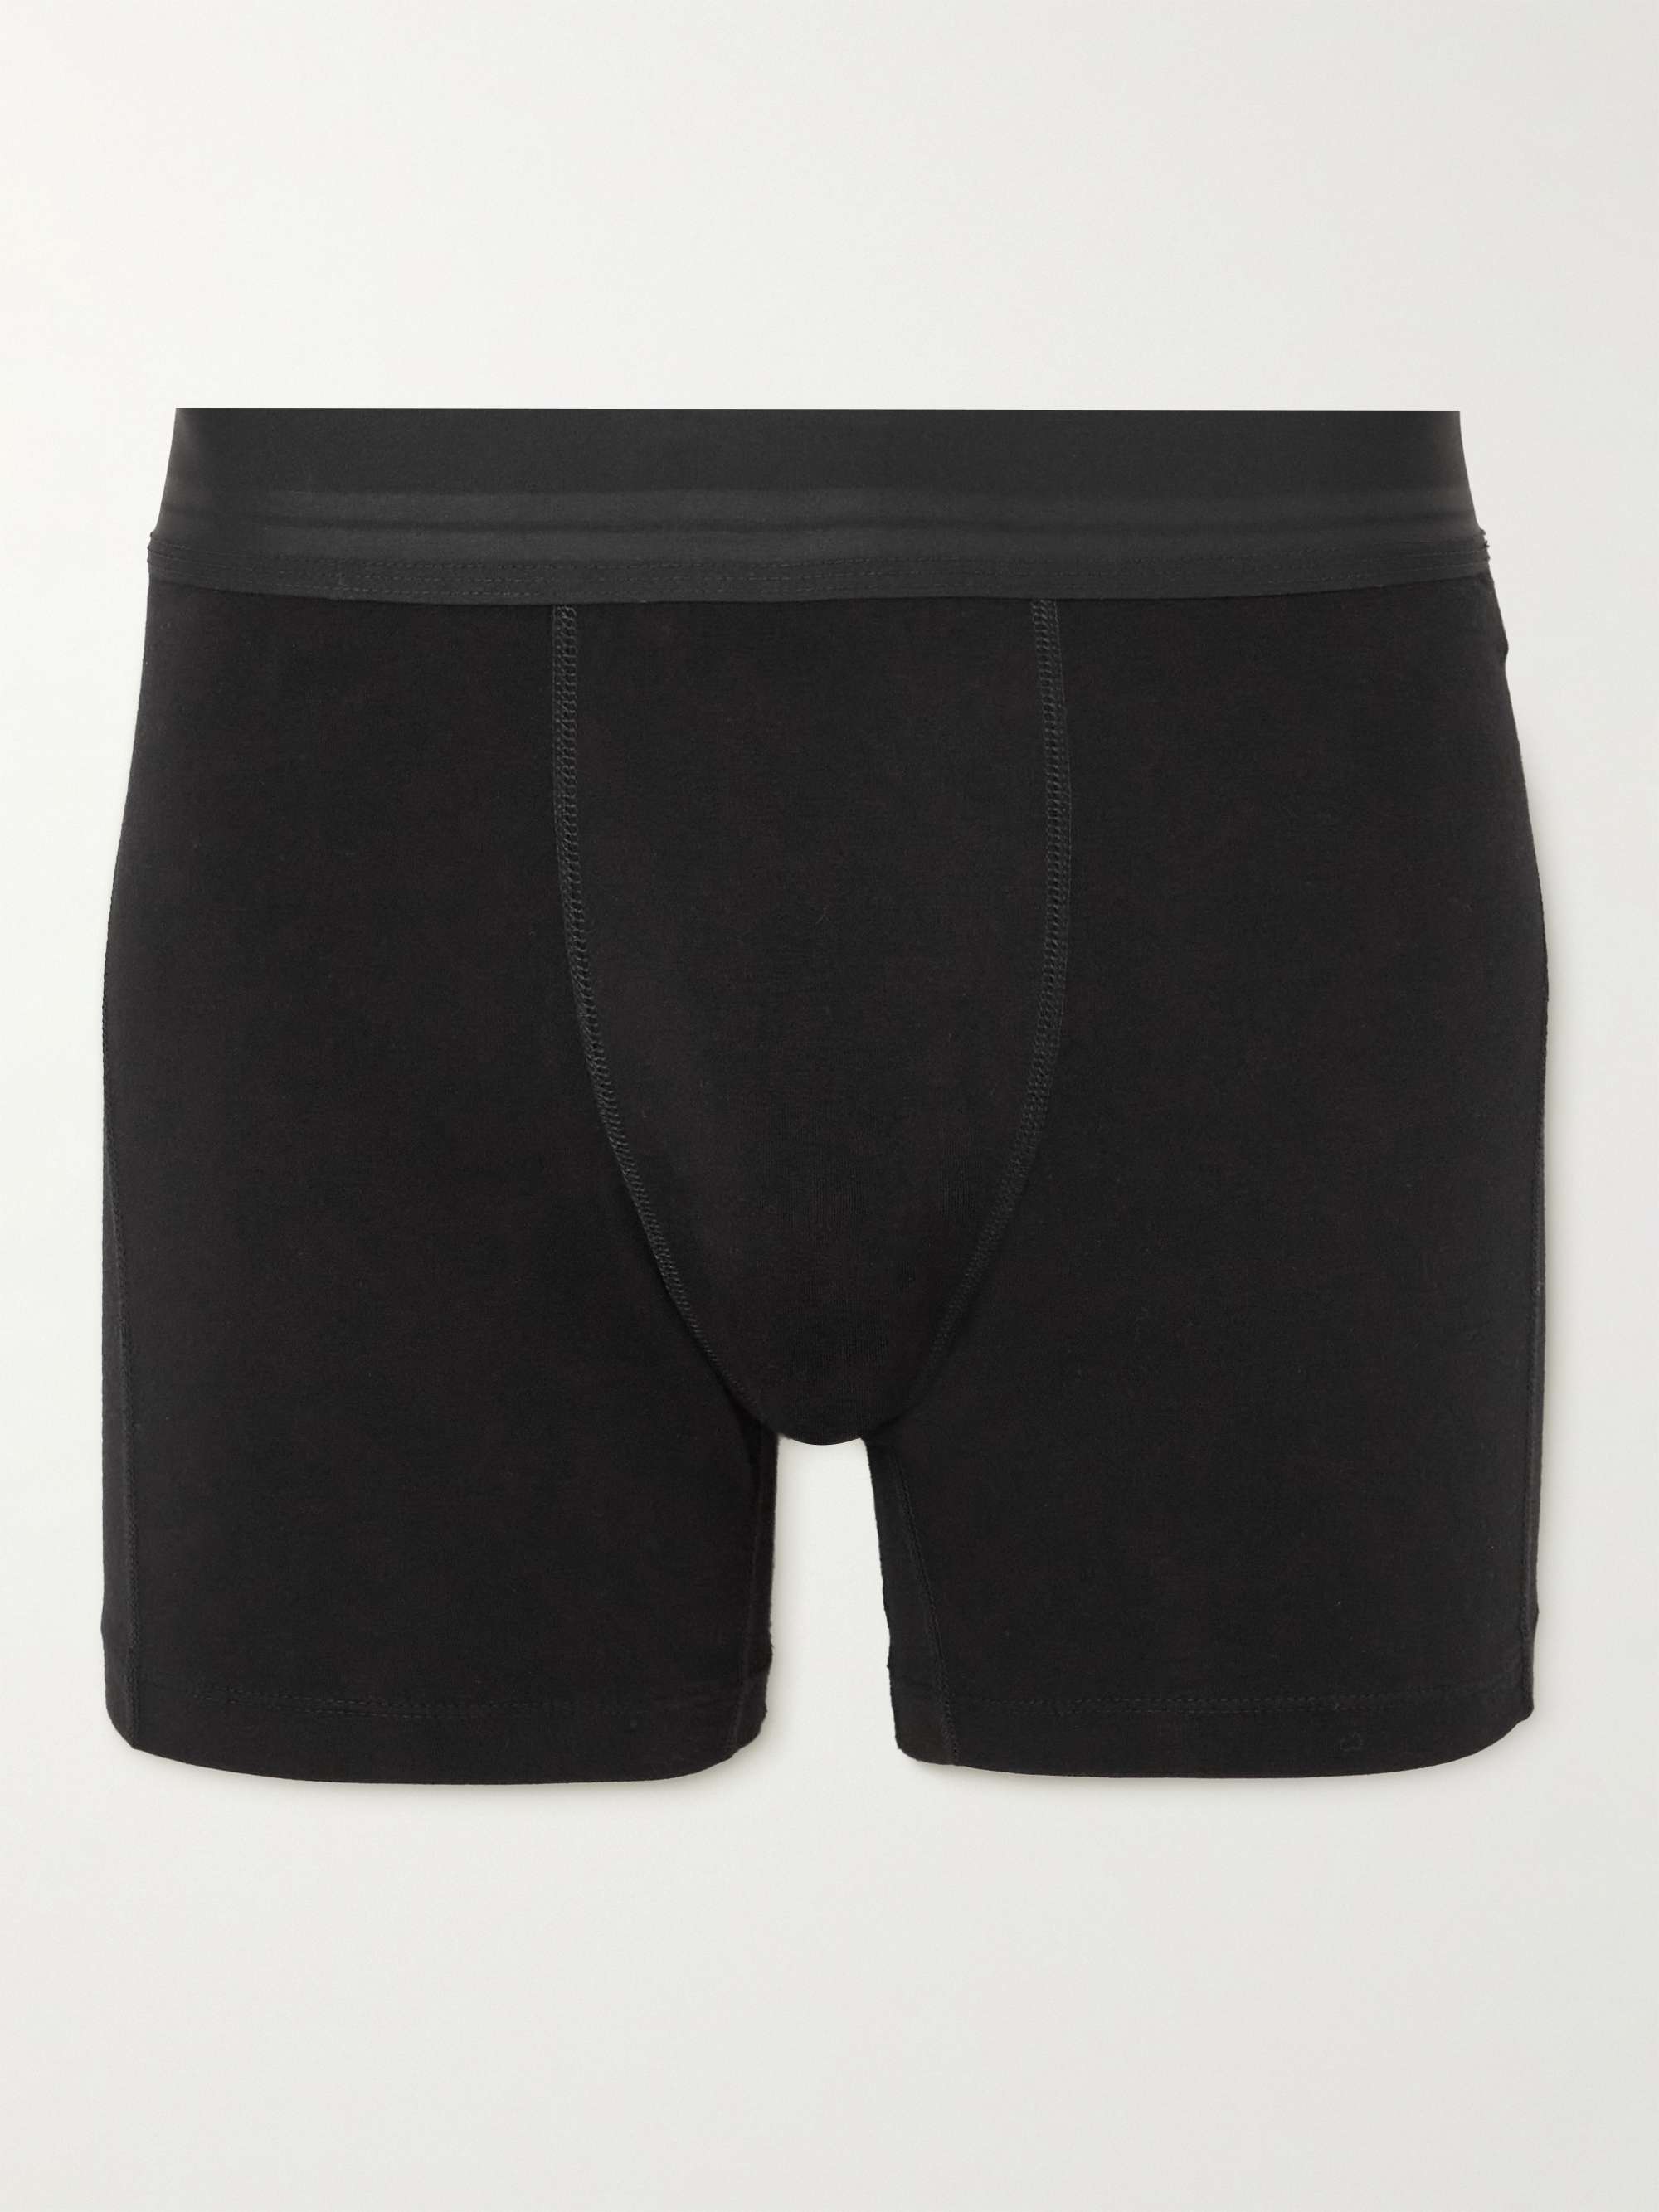 JAMES PERSE Elevated Lotus Sport Cotton-Blend Jersey Boxer Briefs